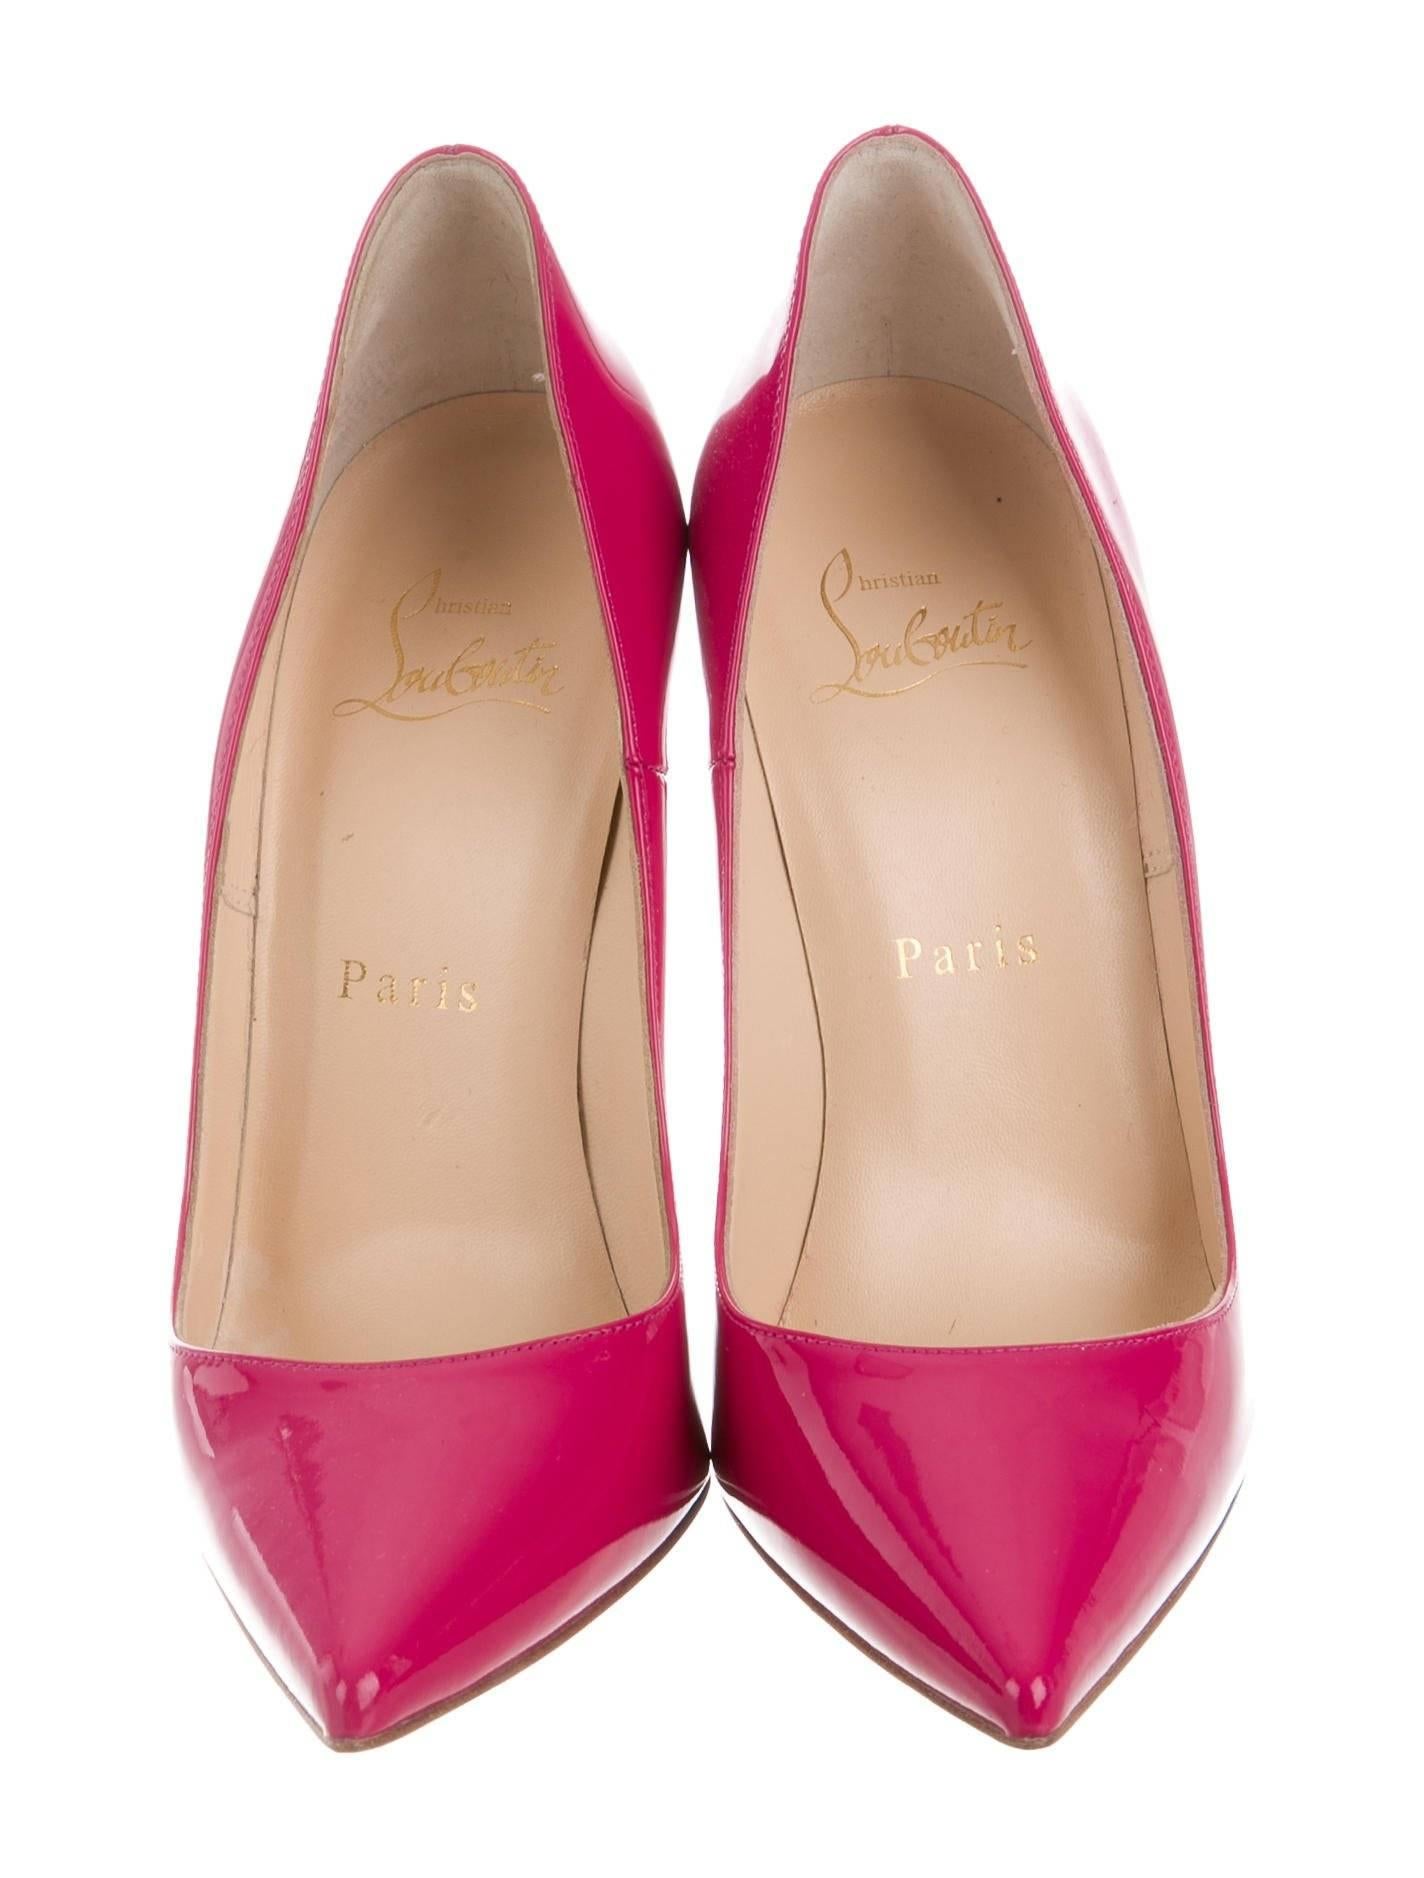 Pink Christian Louboutin NEW Fuchsia Patent Leather Pigalle High Heels Pumps 